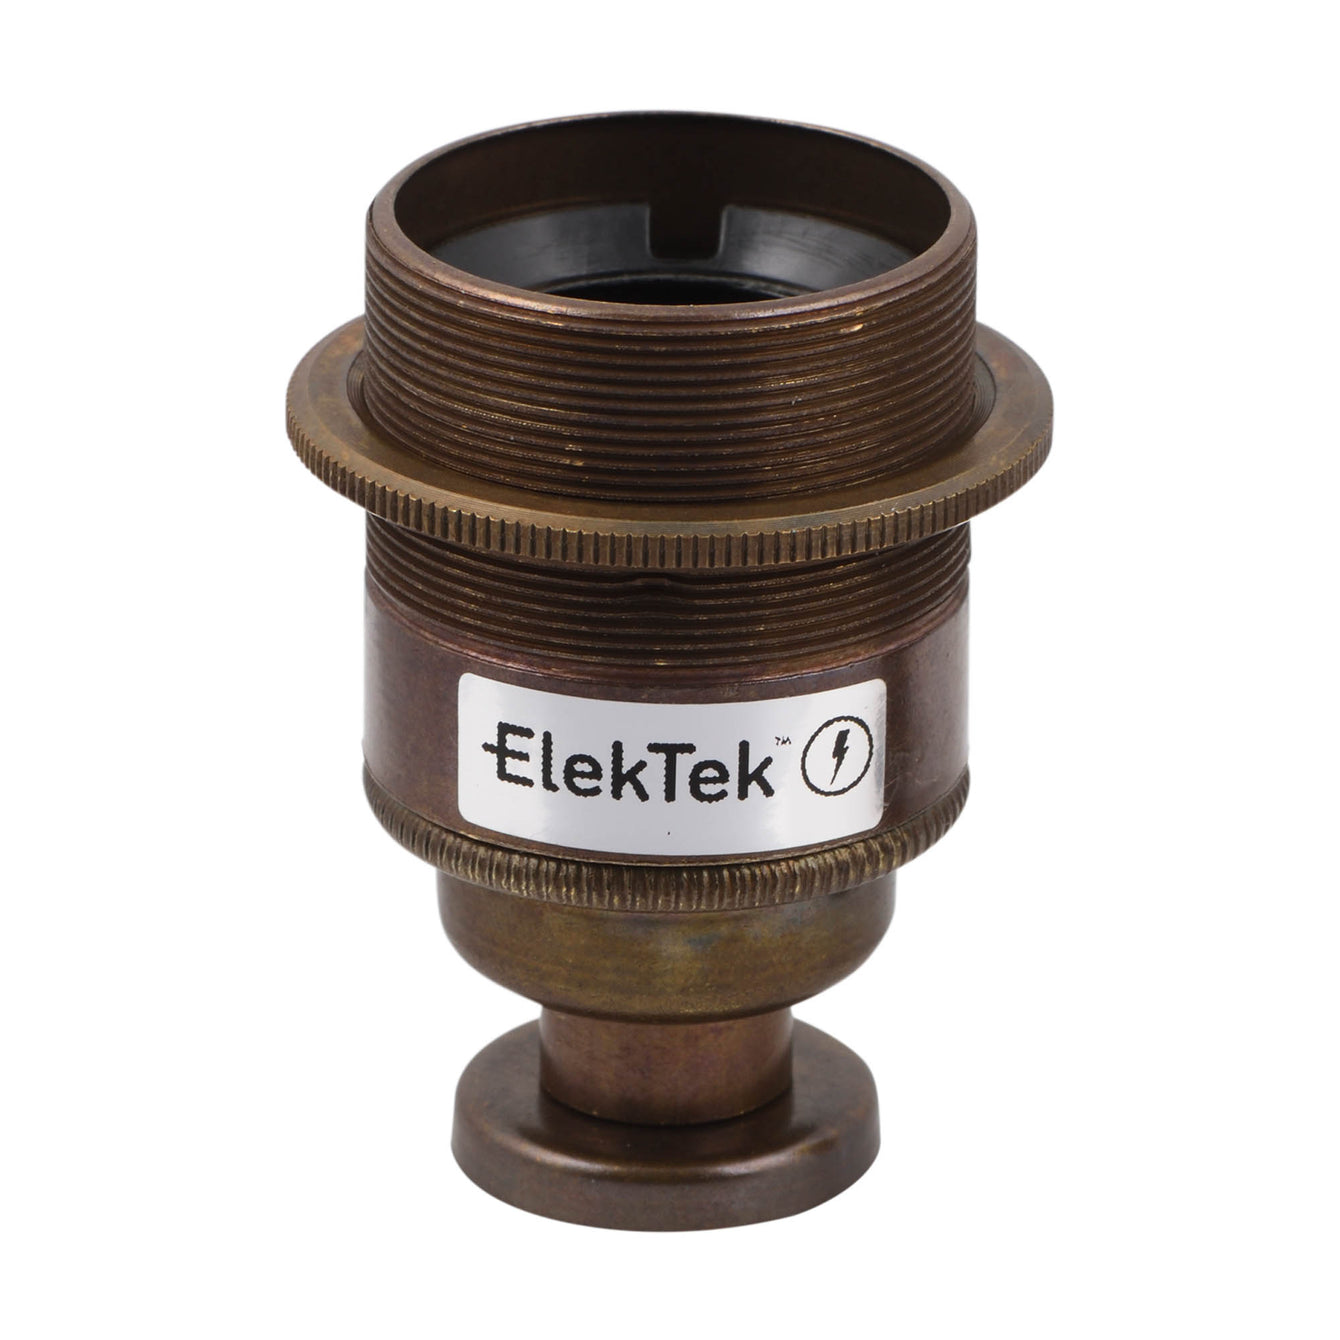 ElekTek ES Edison Screw E27 Lamp Holder Shade Ring With Back Plate Cover and Screws Brass and Matched Cover - Buy It Better 